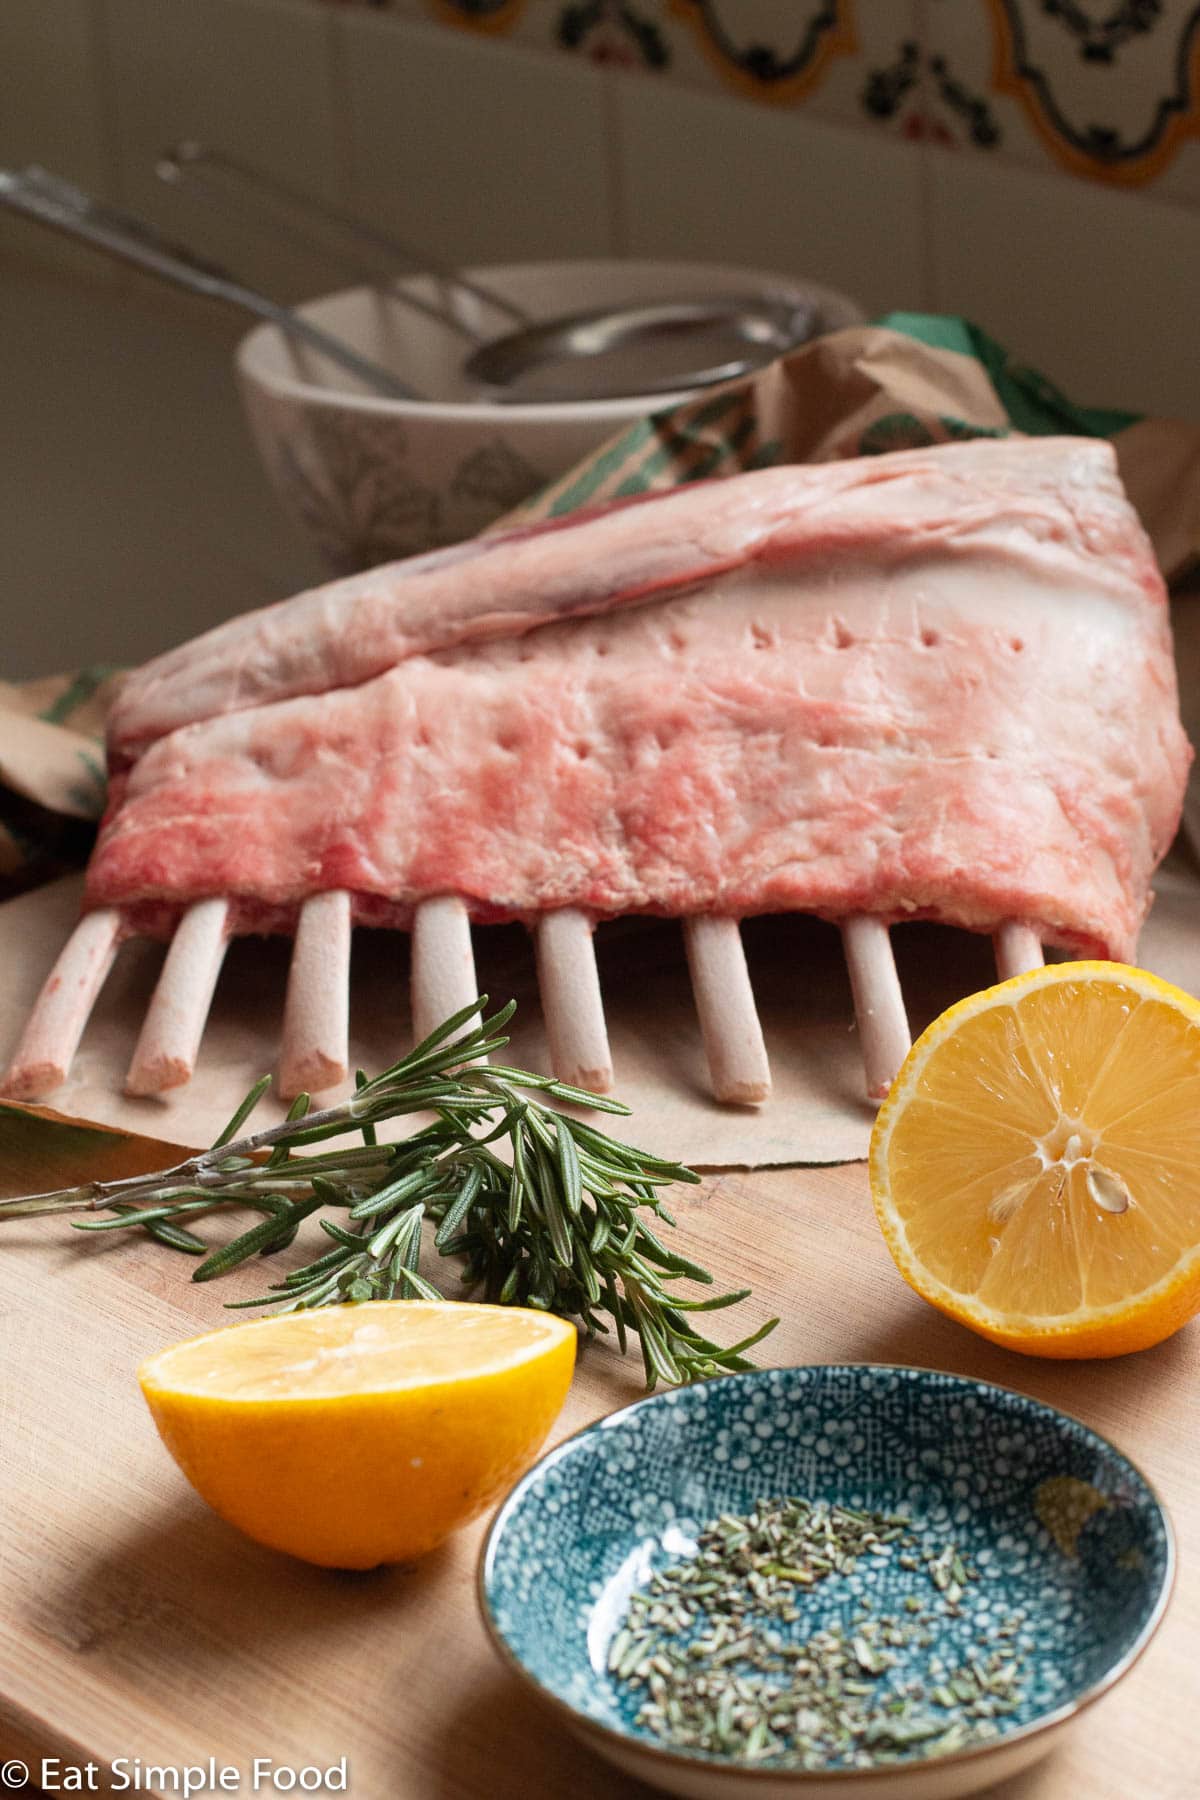 Raw ingredients: 8 bone rack of lamb, 2 lemon halves, diced rosemary in a container and a large rosemary sprig on a wood cutting board.